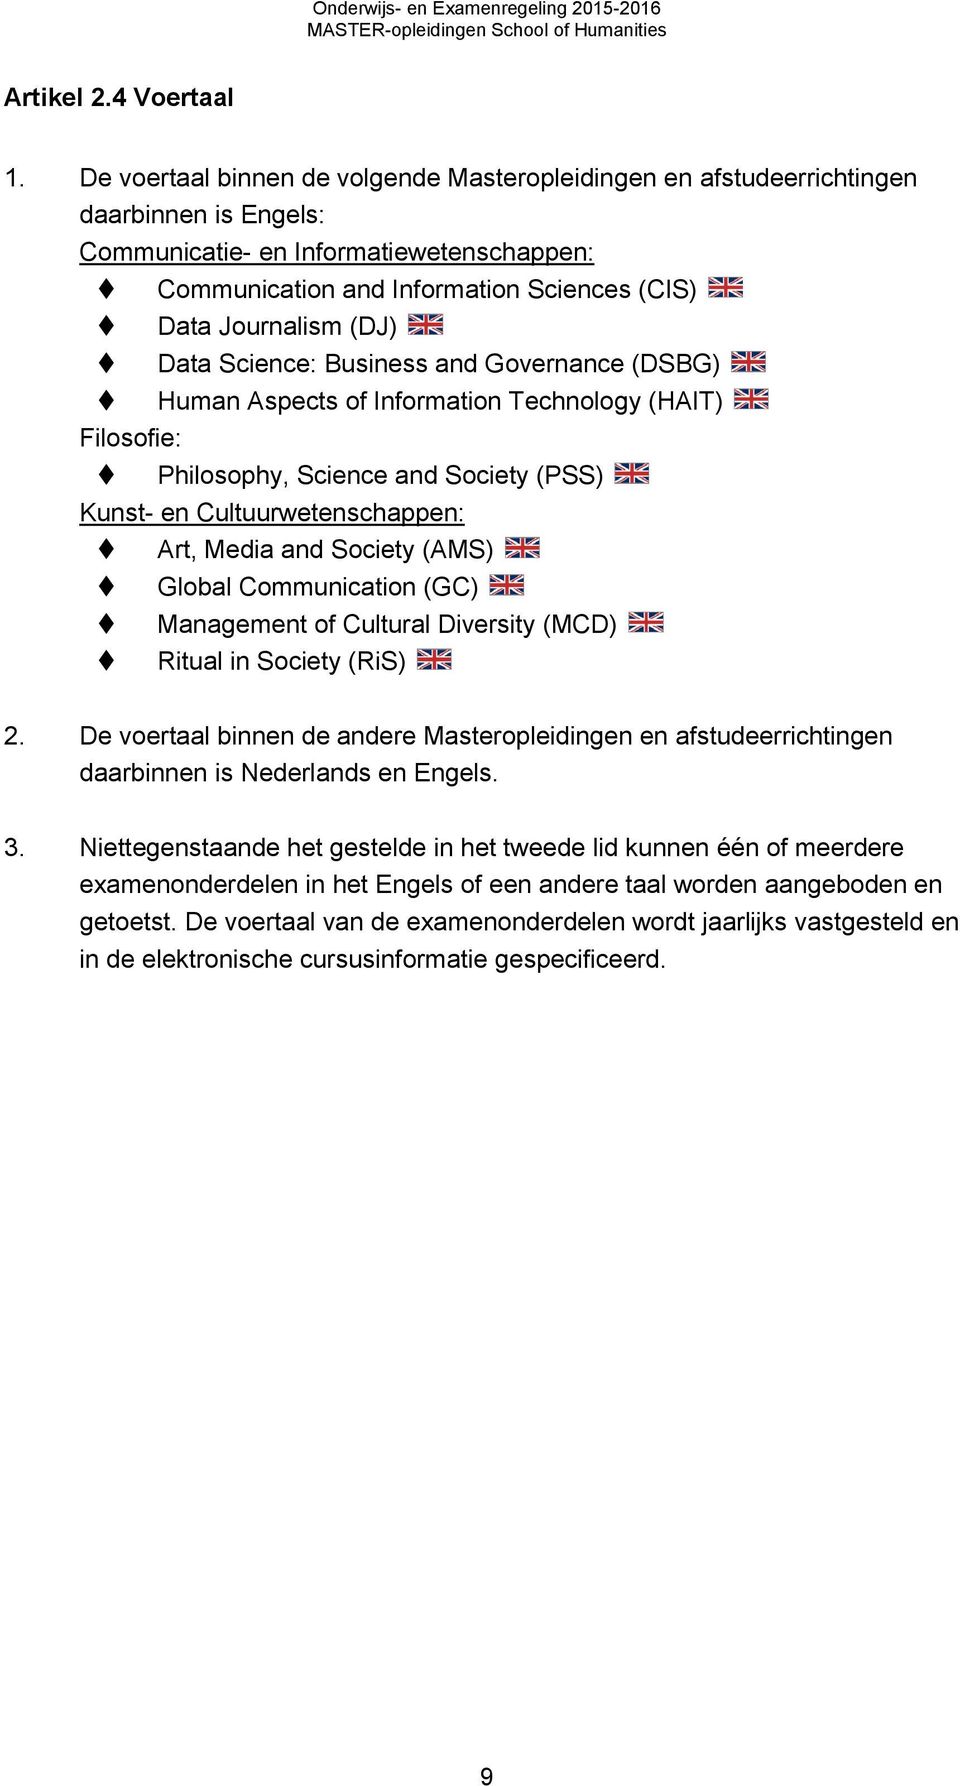 (DJ) Data Science: usiness and Governance (DSG) Human Aspects of Information Technology (HAIT) Filosofie: Philosophy, Science and Society (PSS) Kunst- en Cultuurwetenschappen: Art, Media and Society